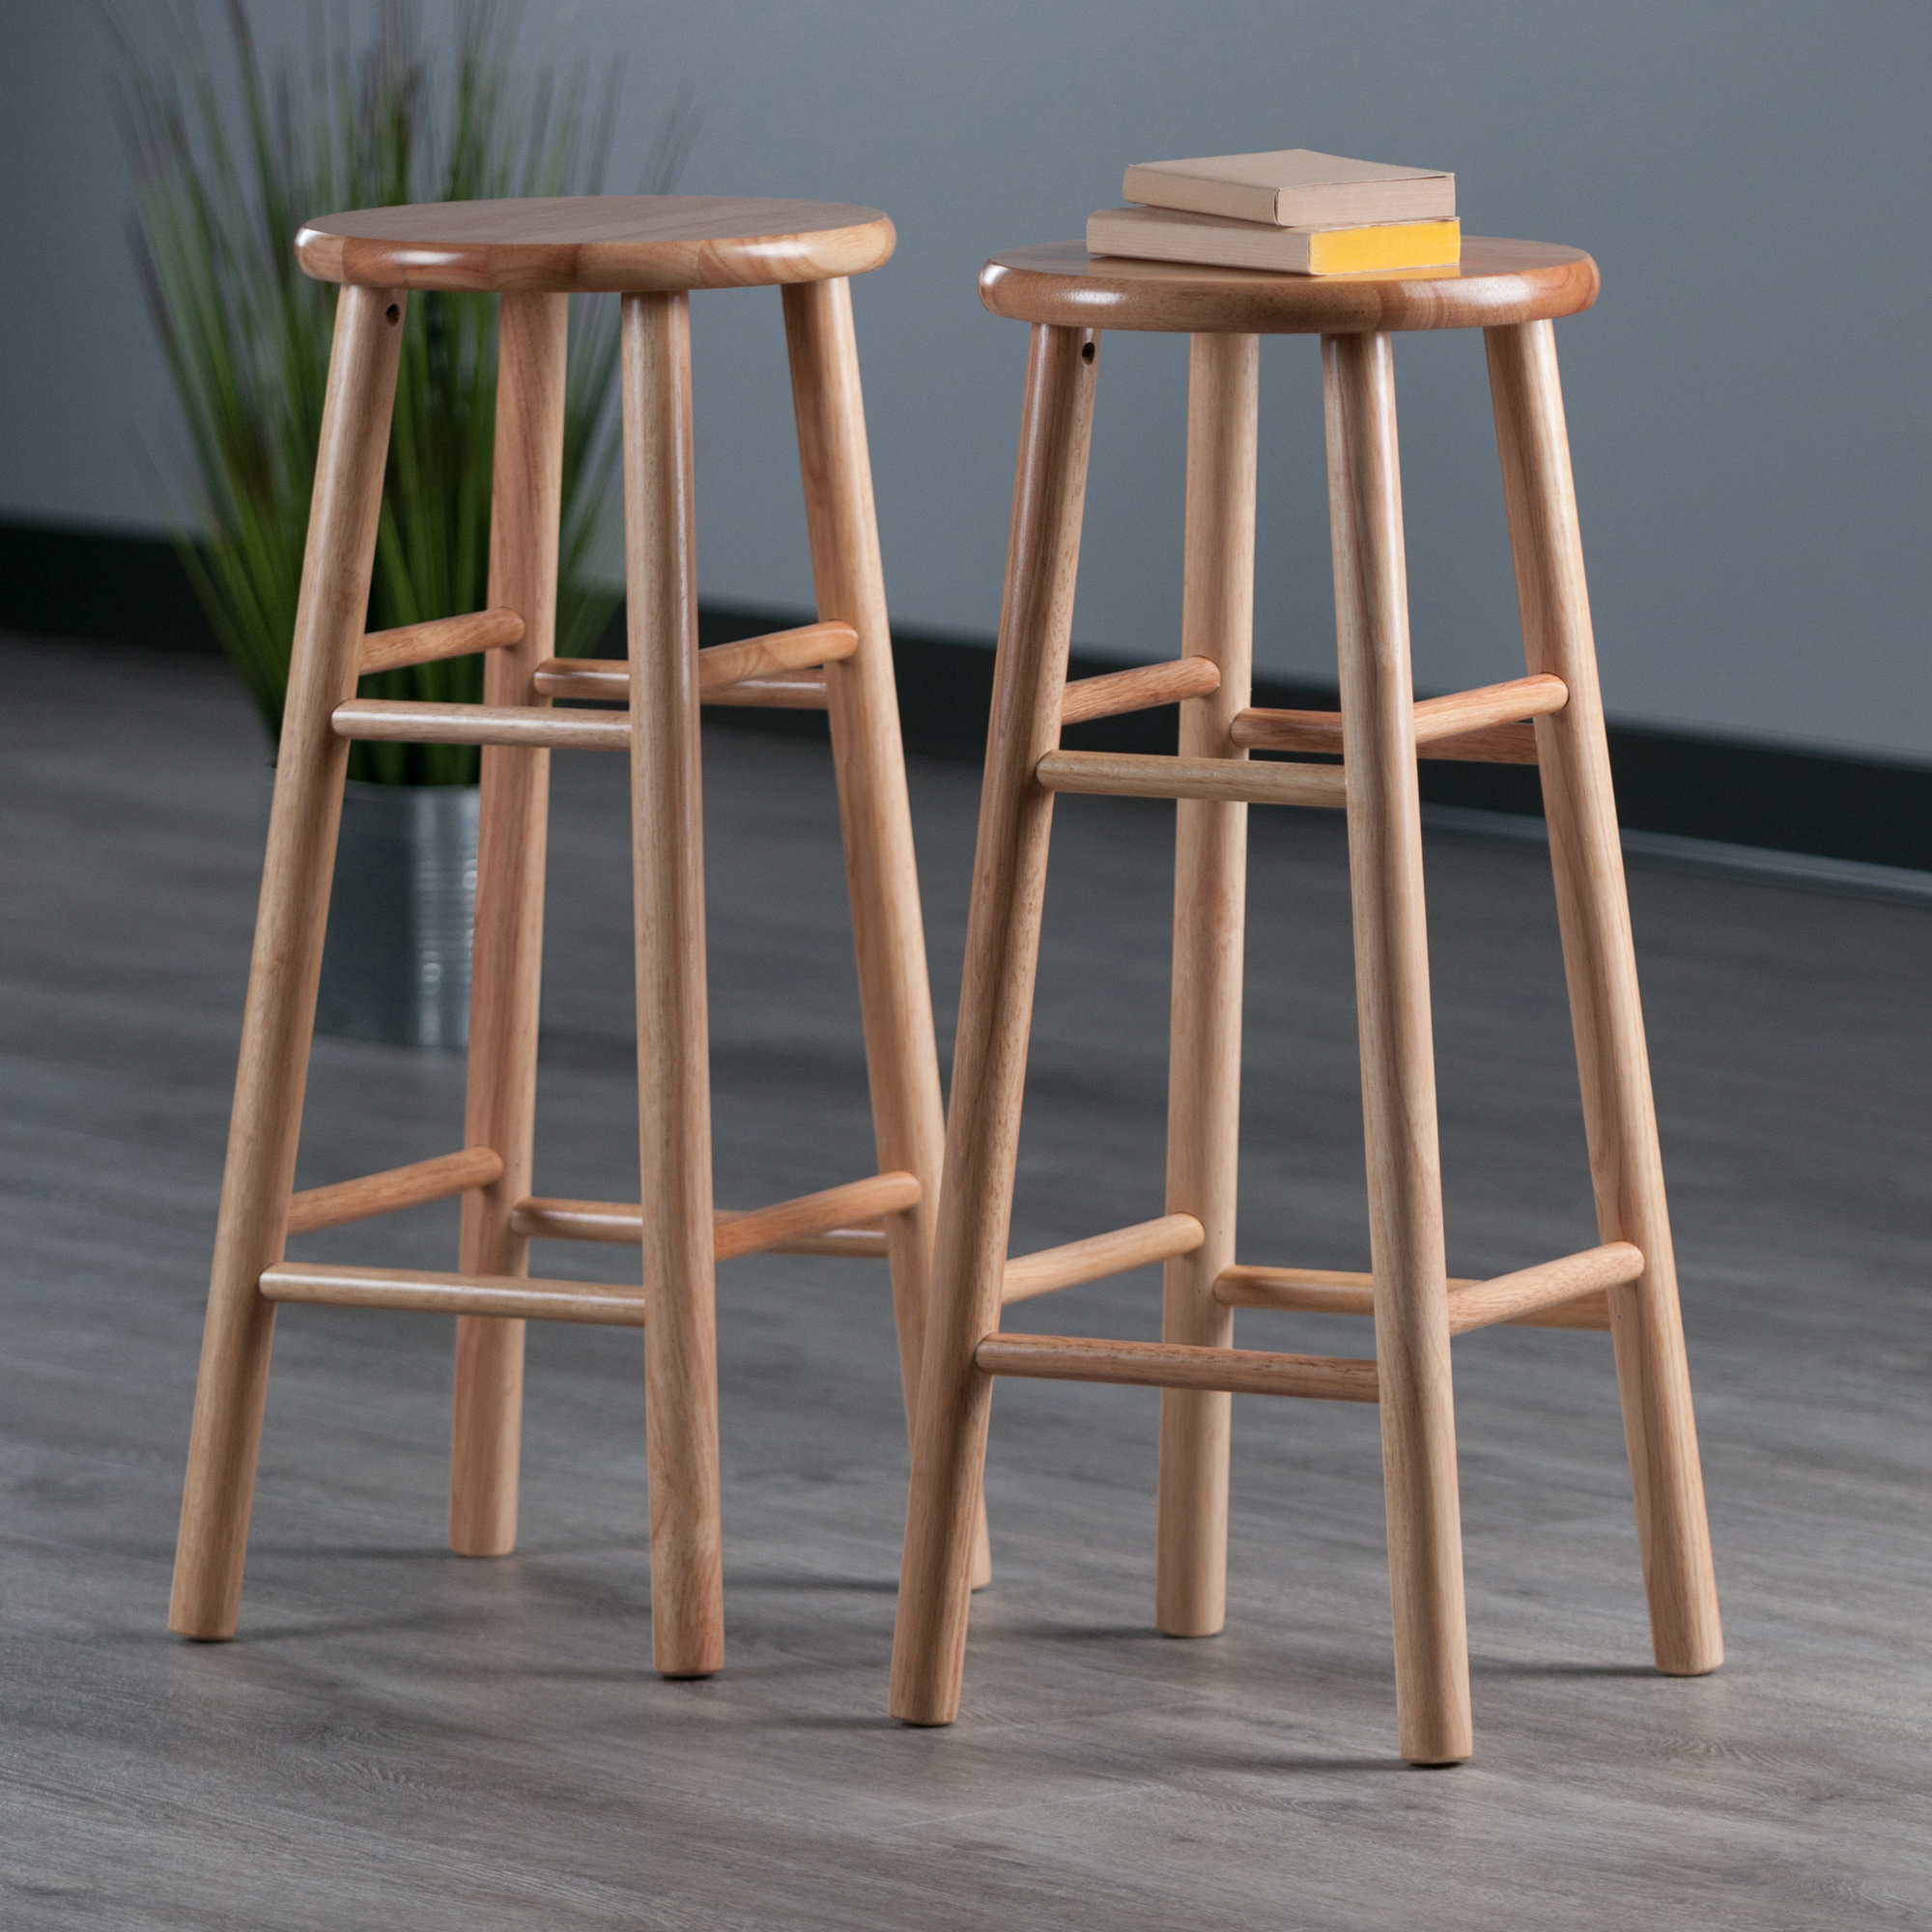 Winsome All Natural 30 in. Beveled Seat Bar Stools - Set of 2 - image 5 of 6